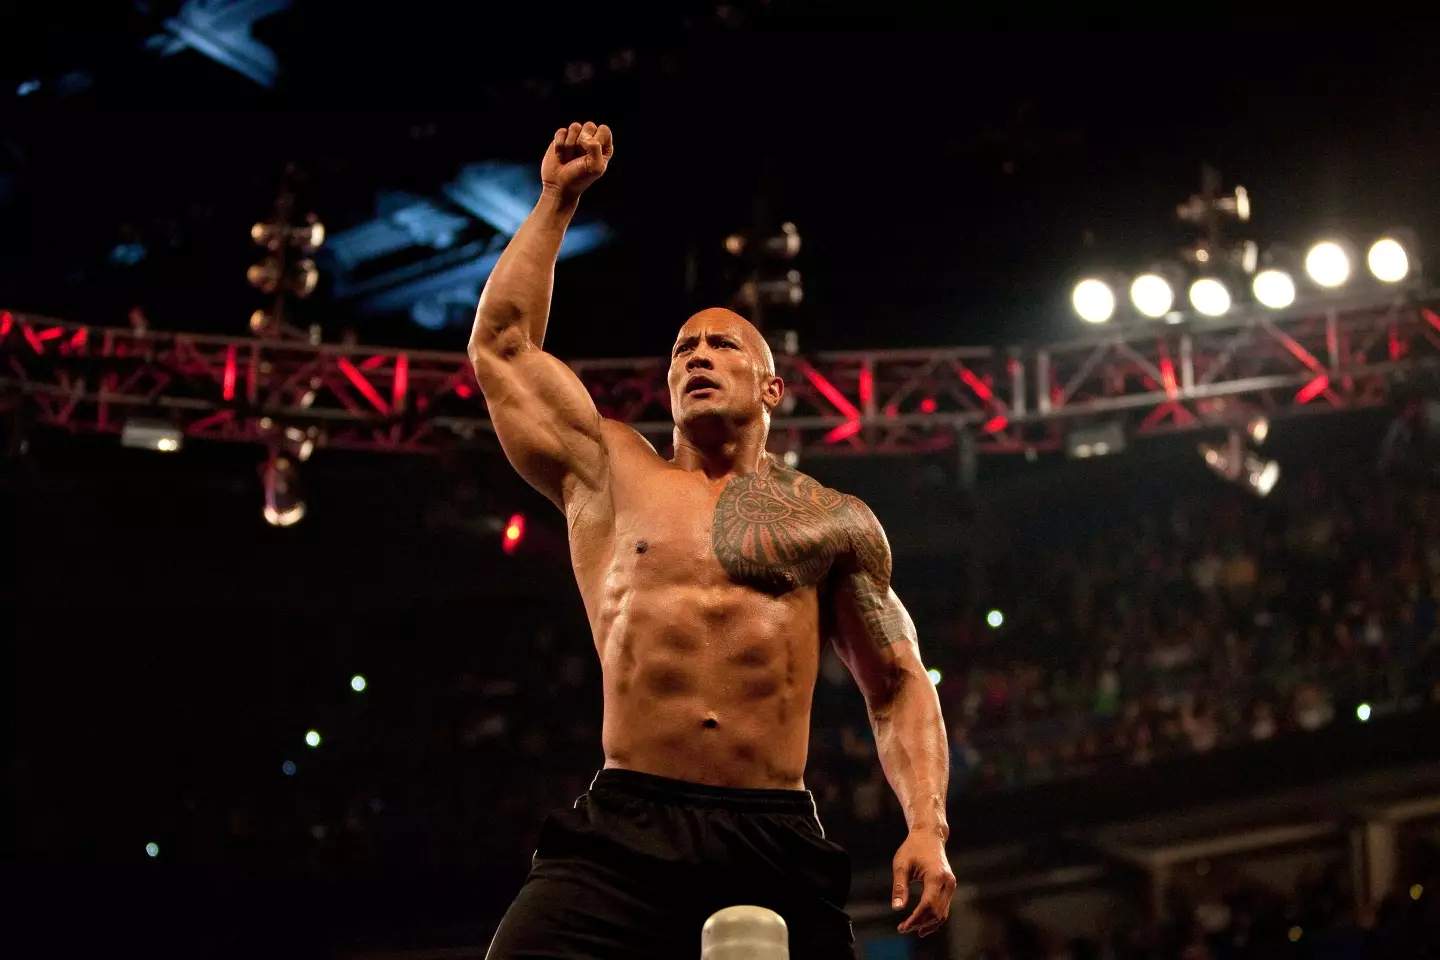 The Rock was said to feel unconscious during his wrestling career.